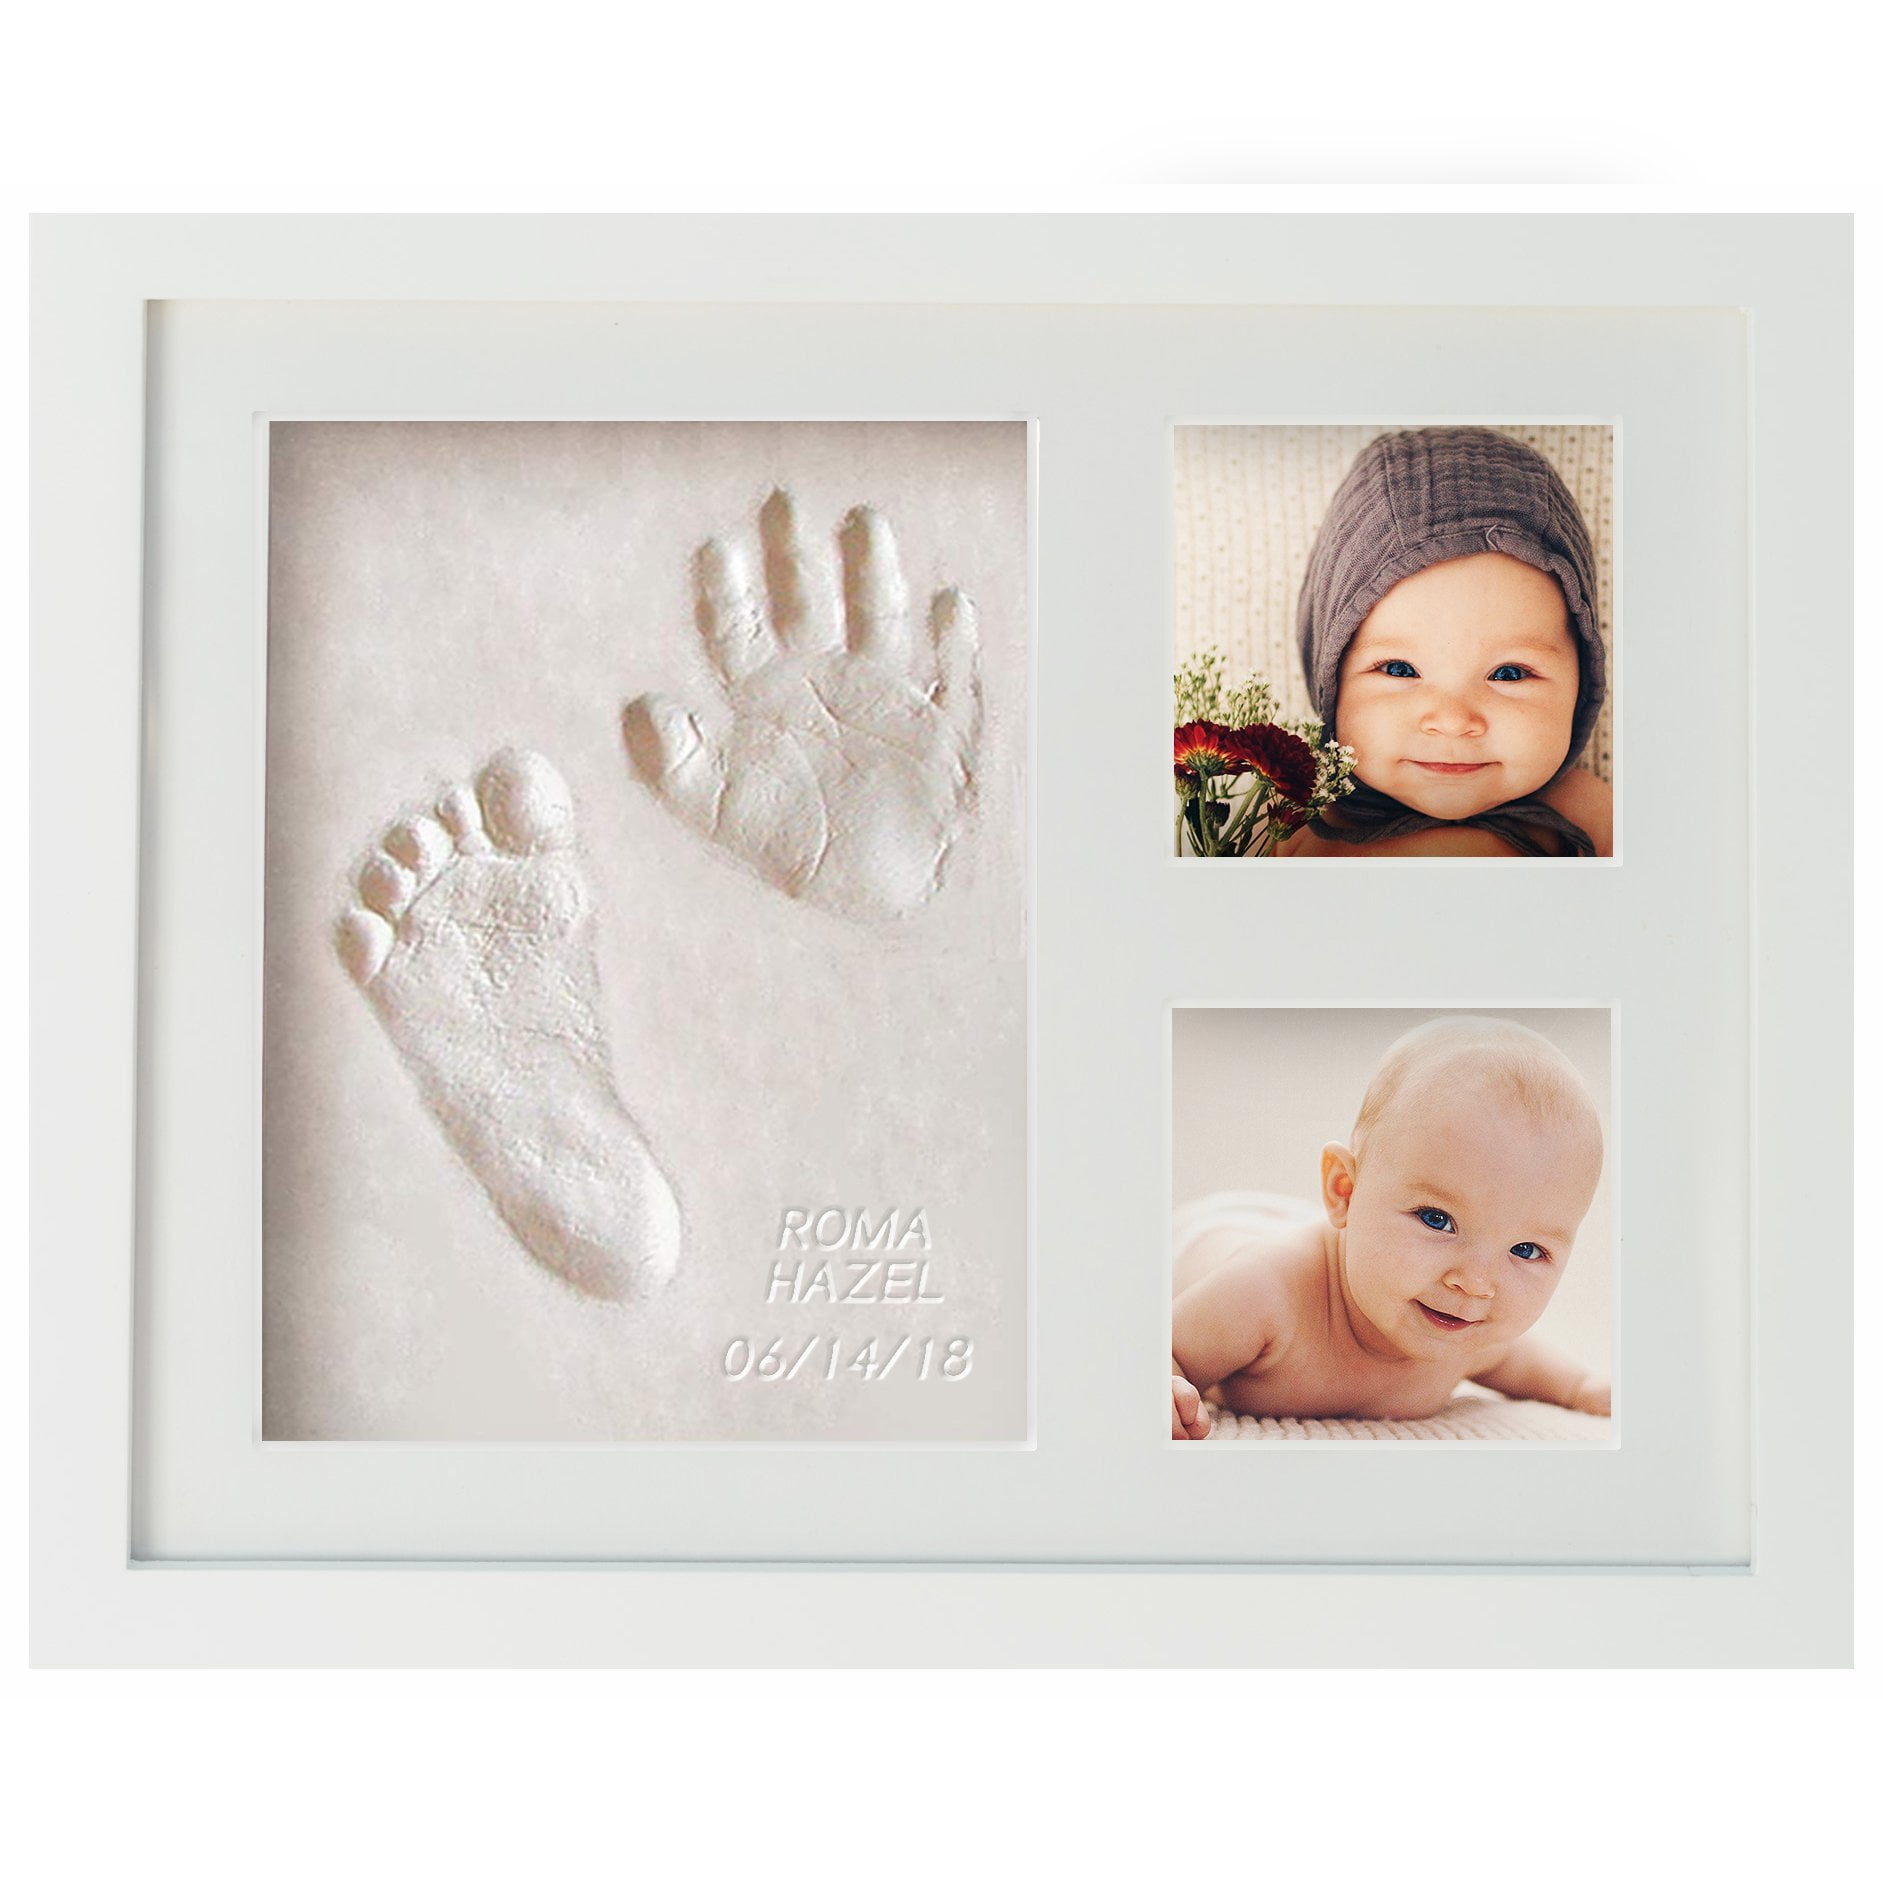 My First Year Baby Hand & Foot Print Frame Kit includes free rolling pin Safe imprint Clay for moulding Newborn Gift-White-Ideal Christmas Gift Premium Wood frame High Quality Acrylic Glass Cover